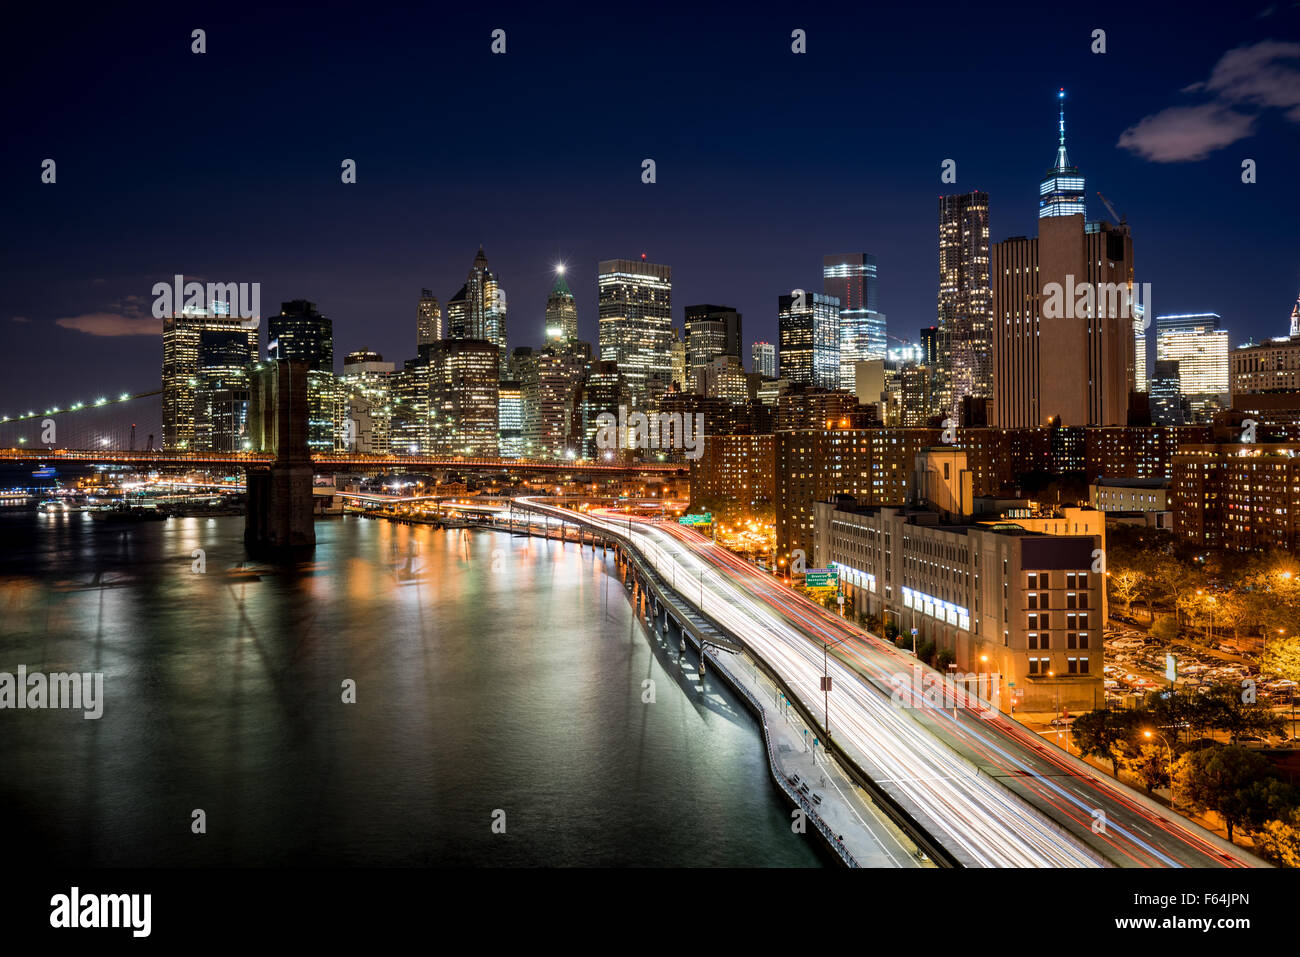 Cityscape at night of Lower Manhattan Financial District with illuminated skyscrapers and World Trade Center. New York City Stock Photo